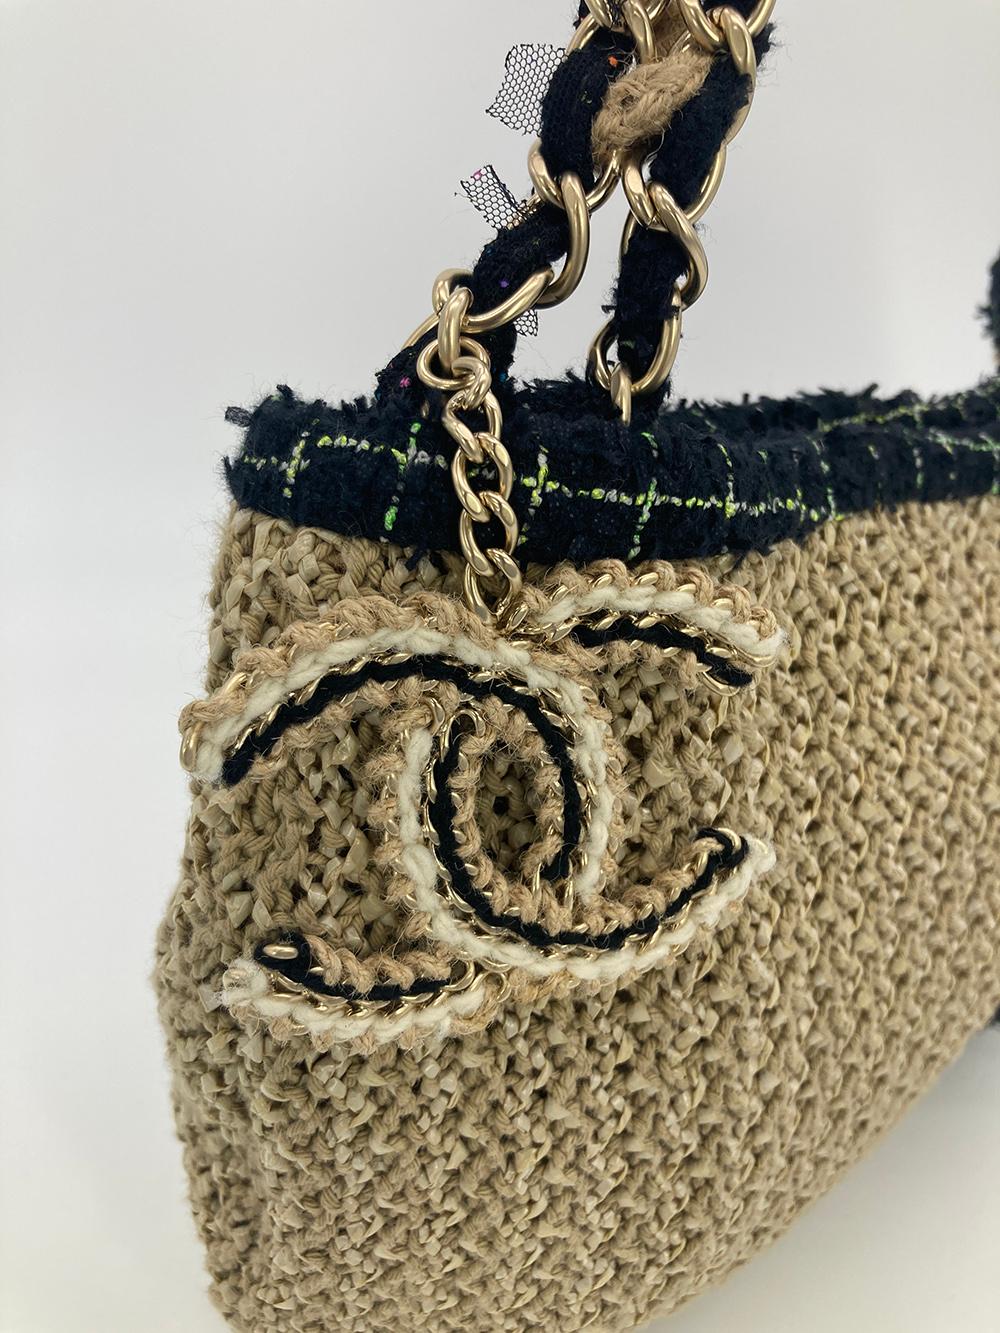 Chanel Woven Tan Rattan Straw Wool Trim Camellia Flower Shoulder Bag In Excellent Condition For Sale In Philadelphia, PA